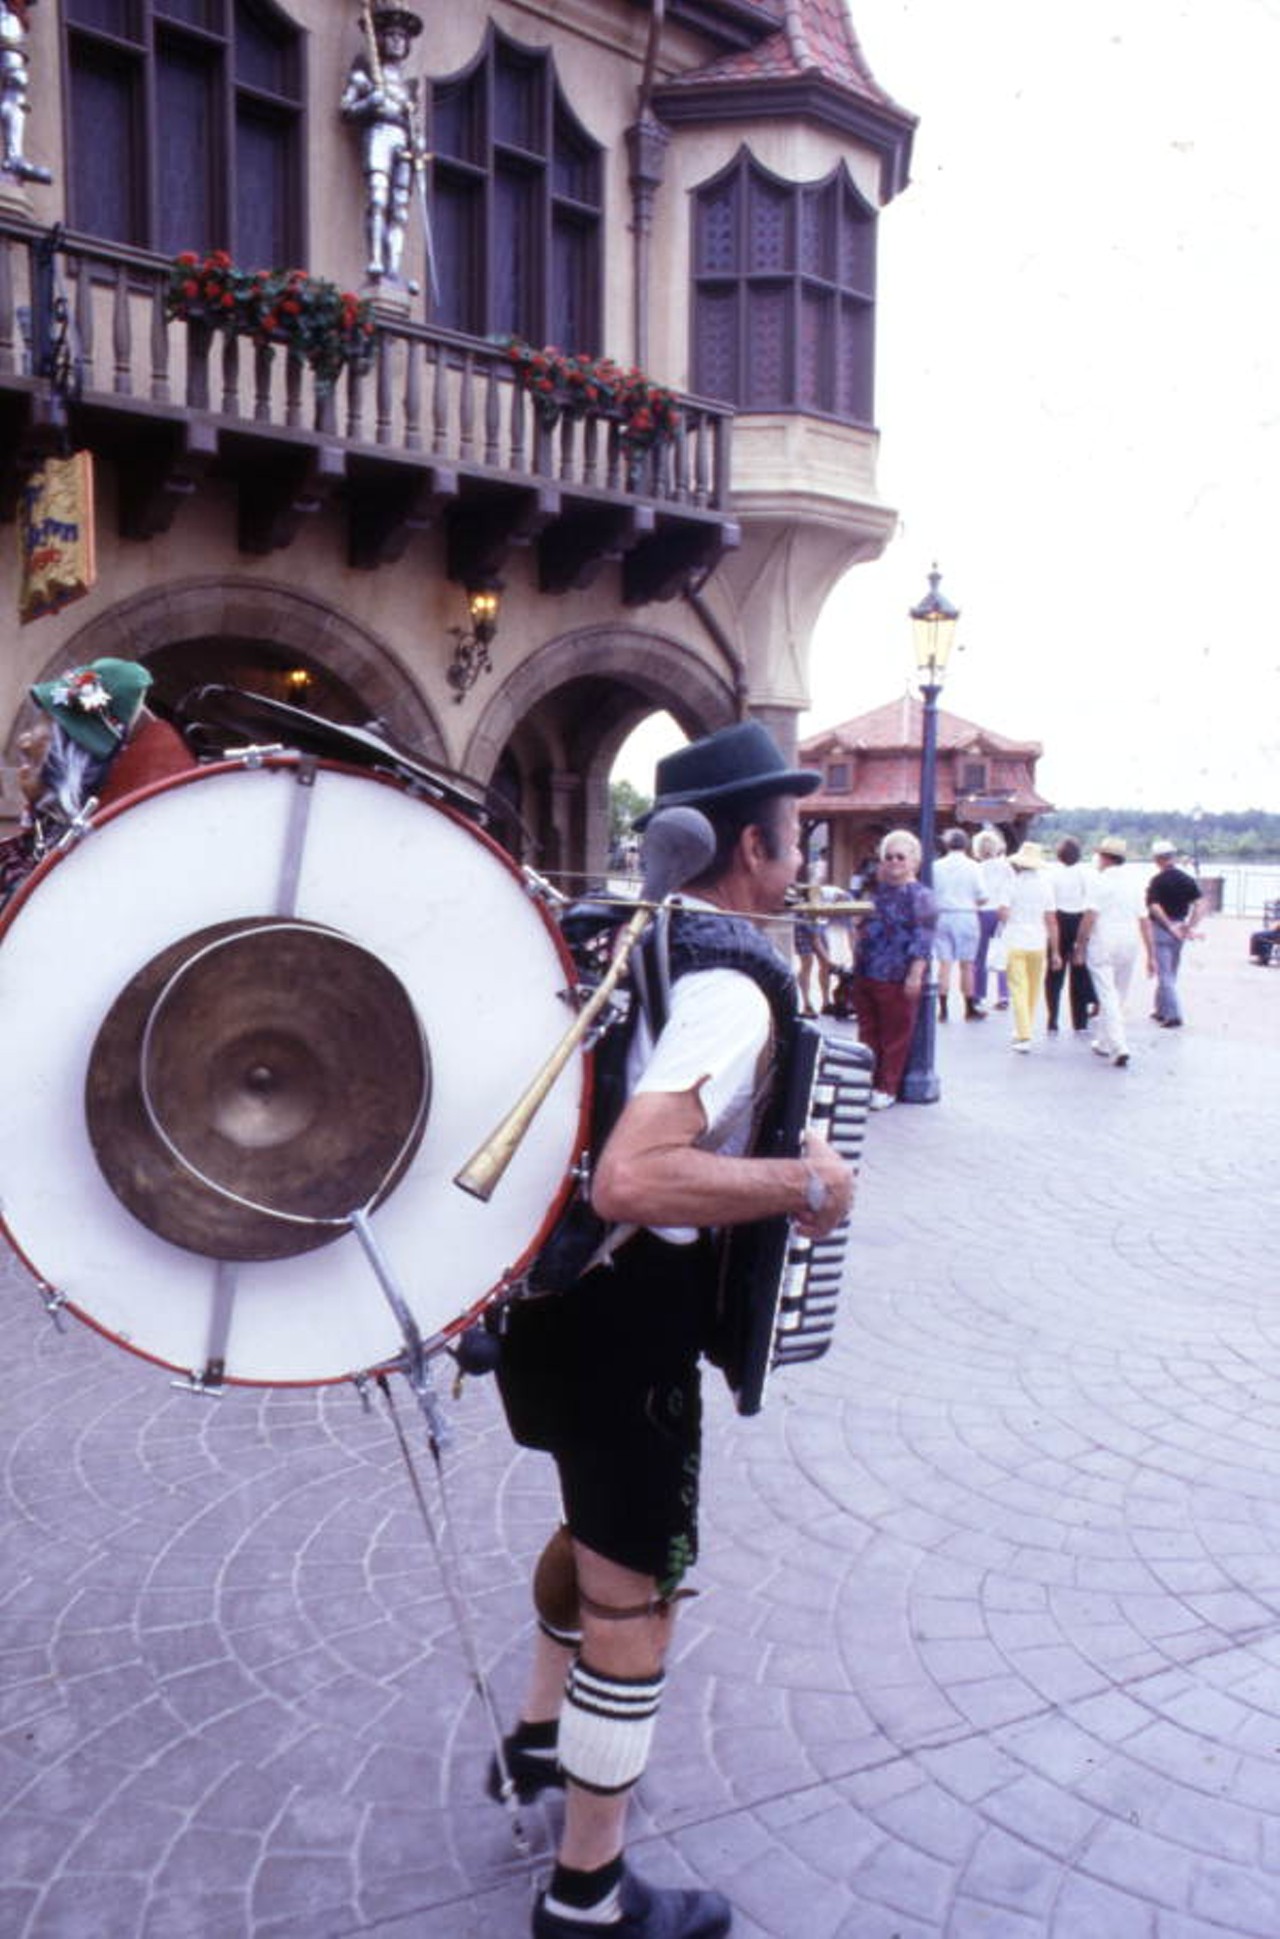 Musician performing at the Germany Pavilion in EPCOT Center at the Walt Disney World Resort in Orlando, Florida, 1982